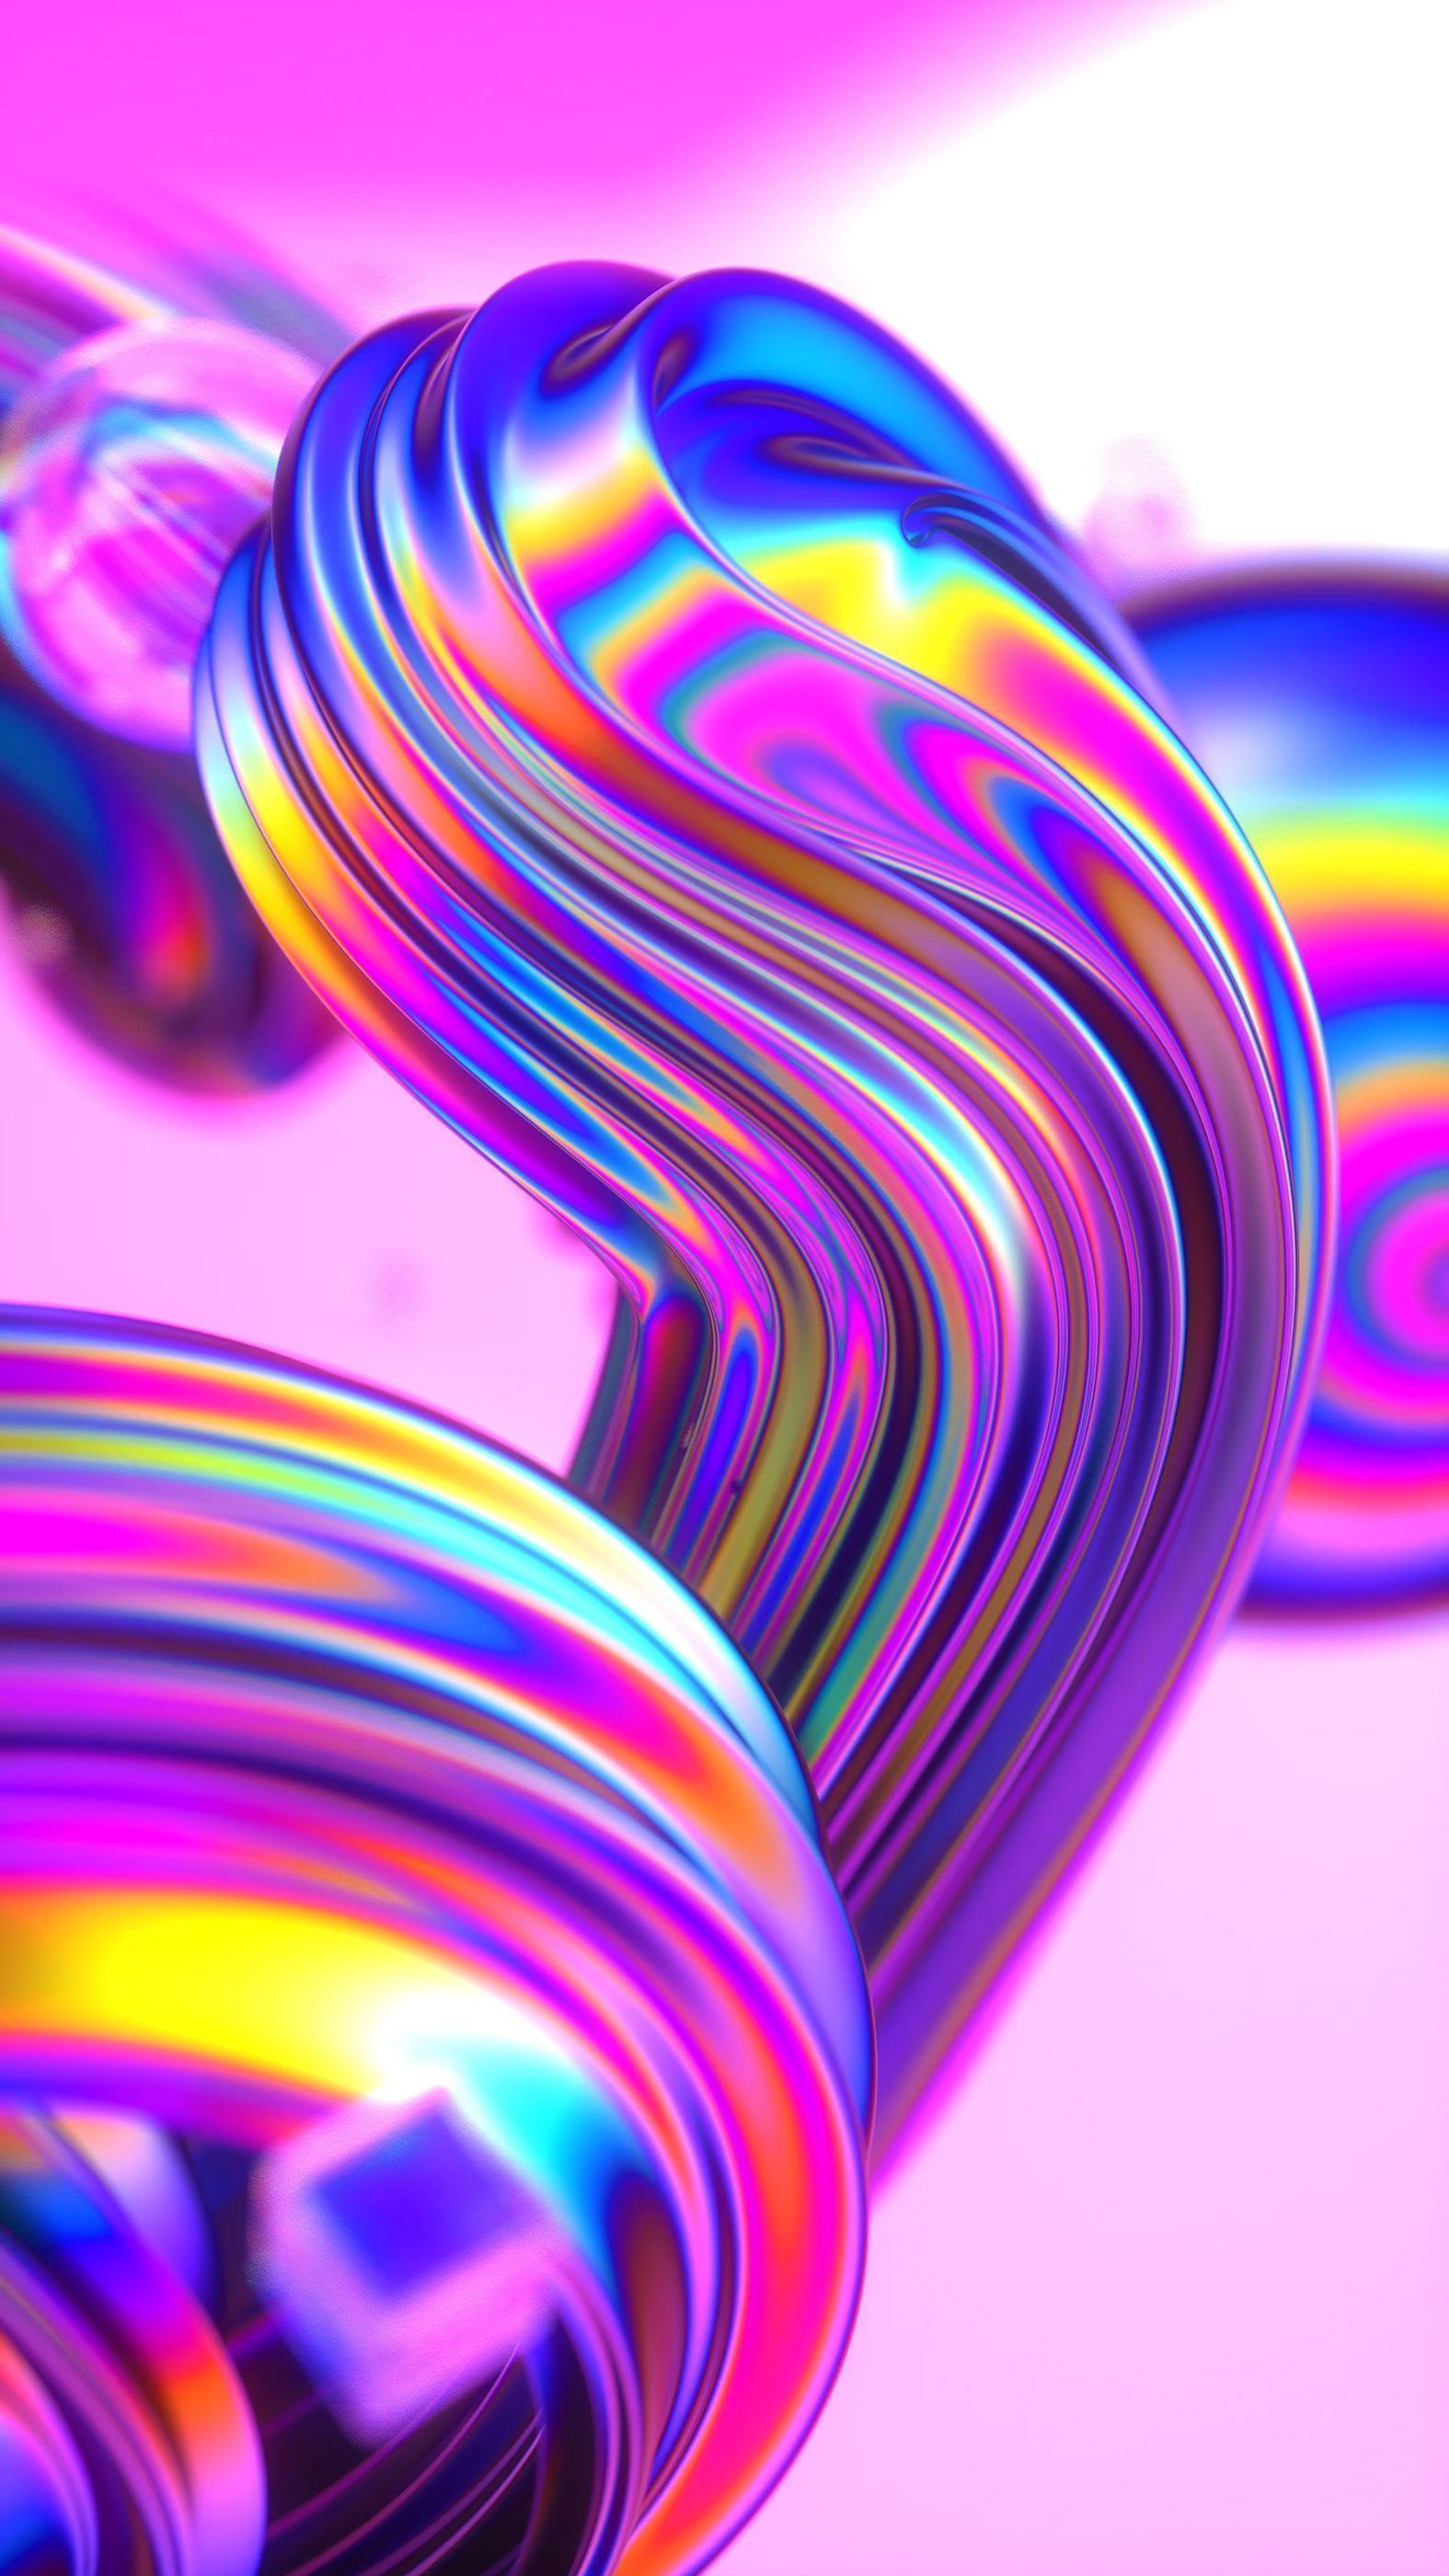 A colorful image with a wave of rainbow colors. - Iridescent